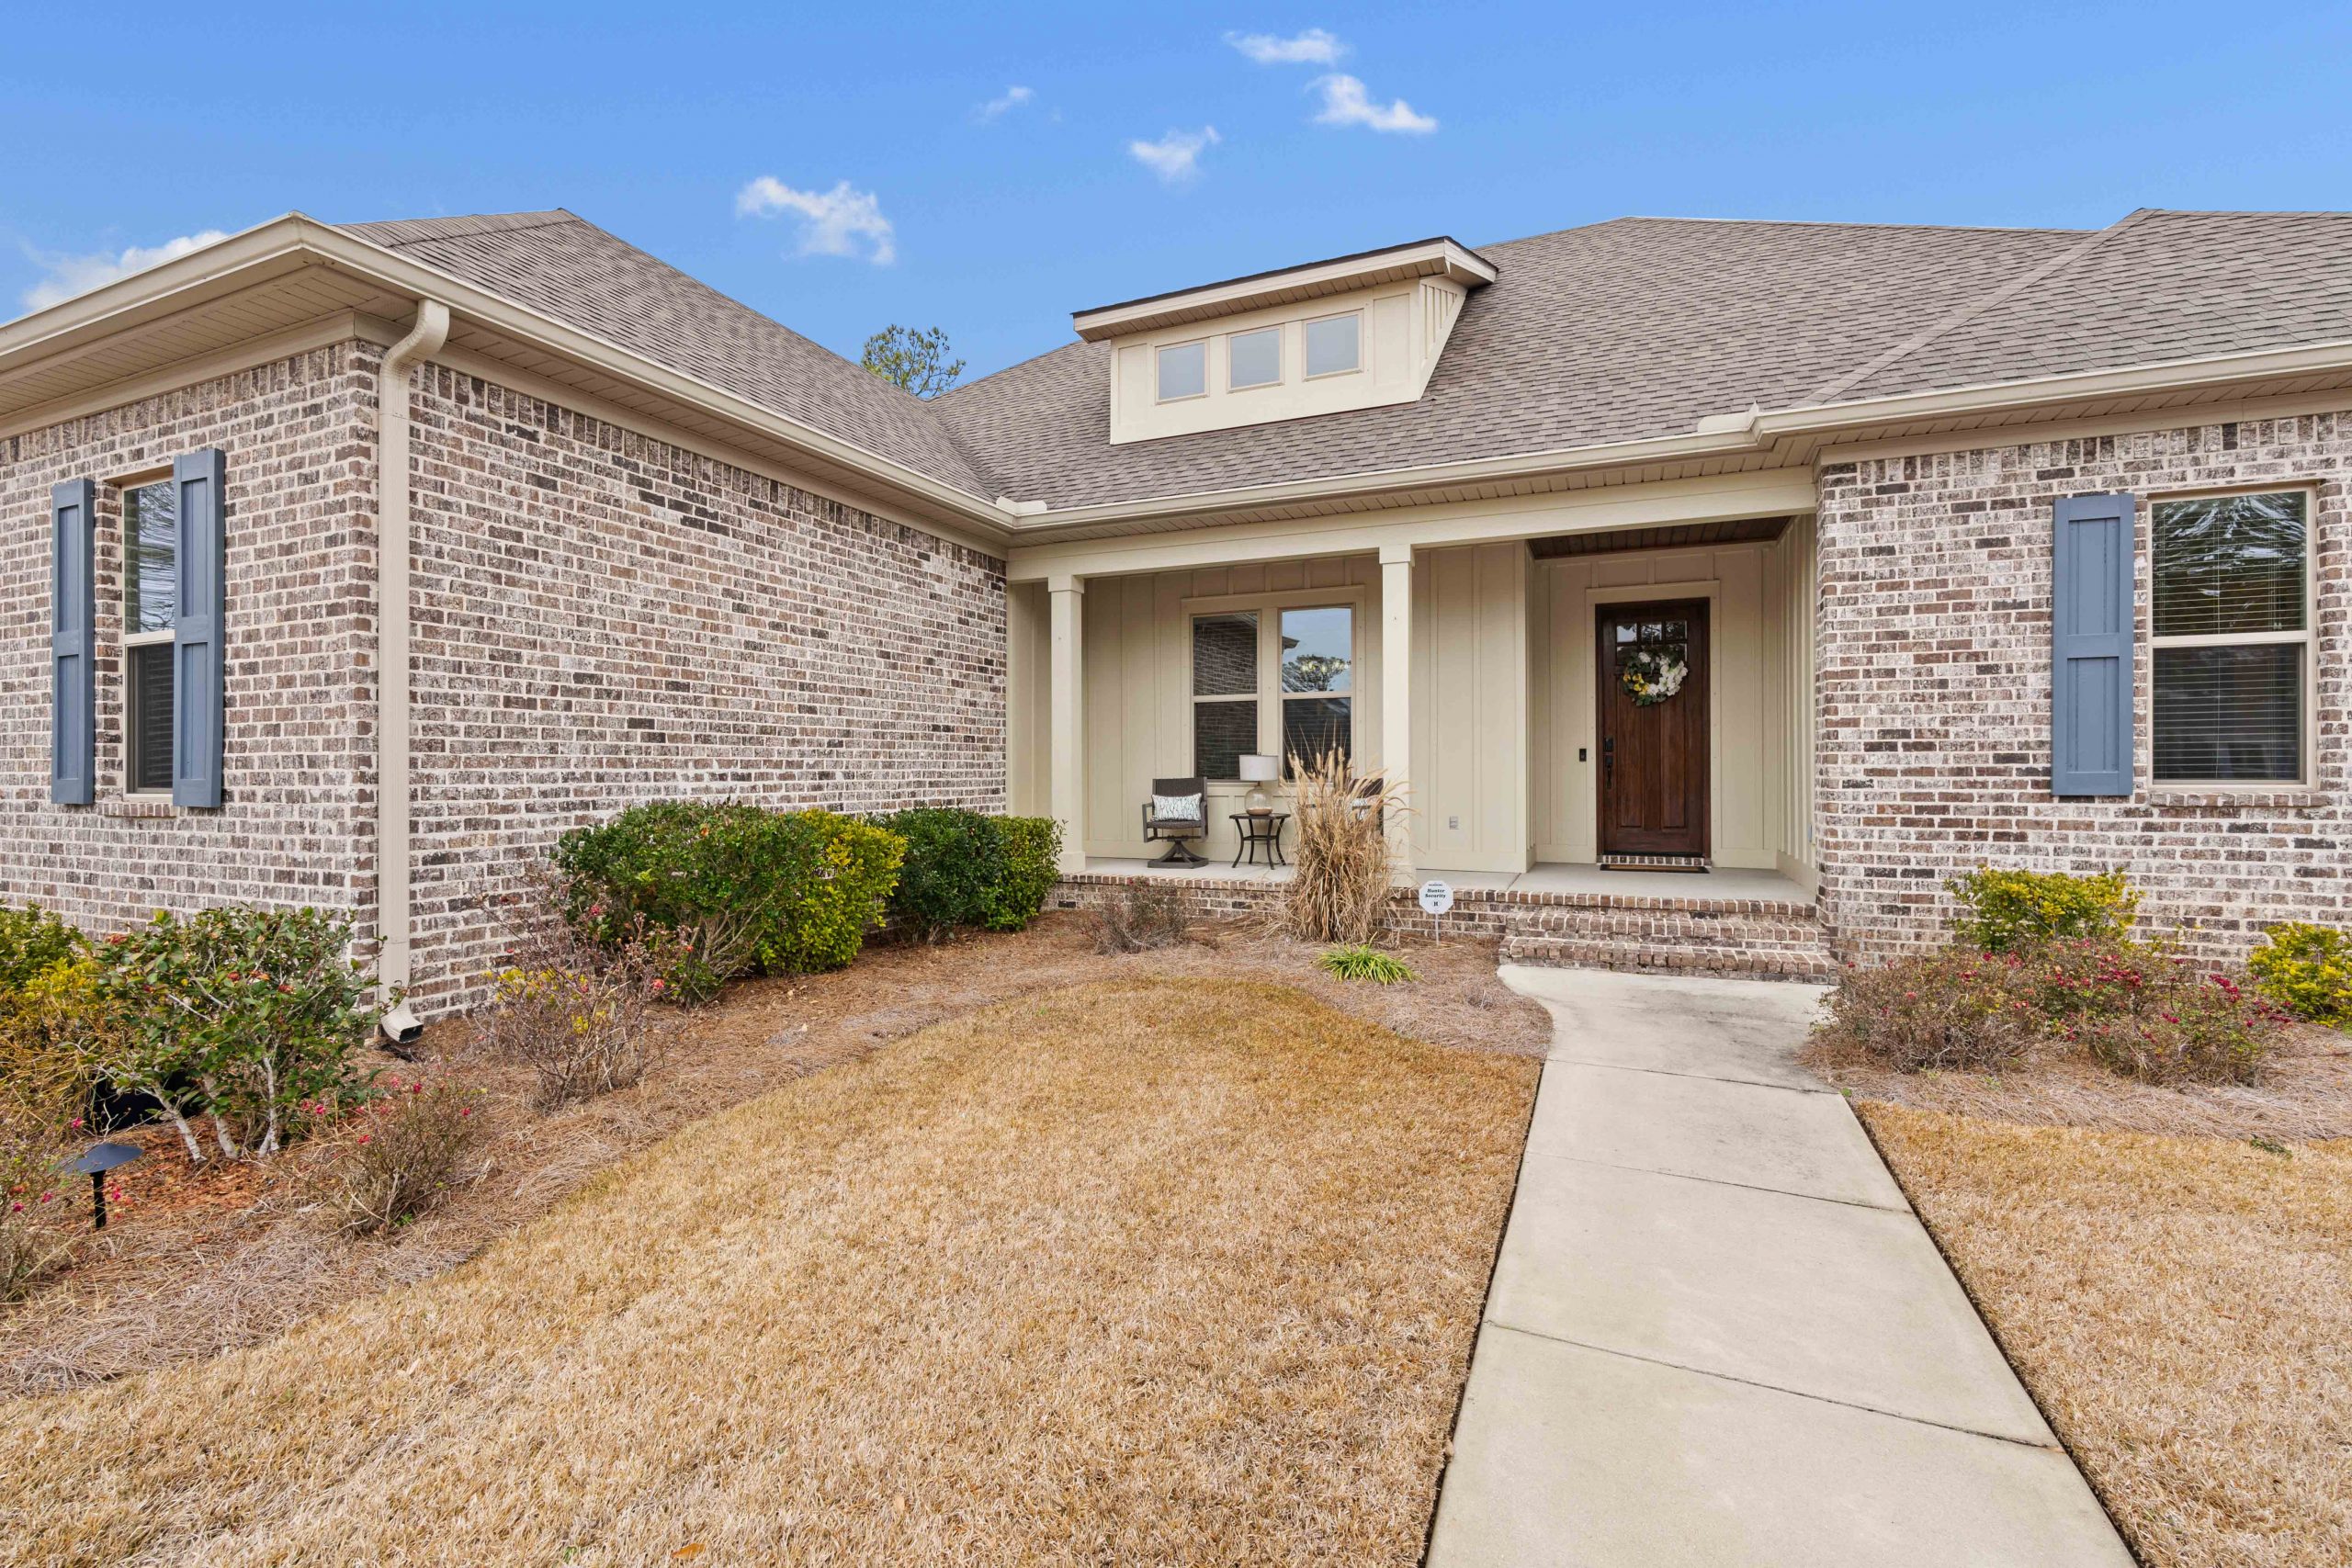 389 Rothley Ave Fairhope AL 36532 Listed by Sheila Jones and Company Real Estate Team 2